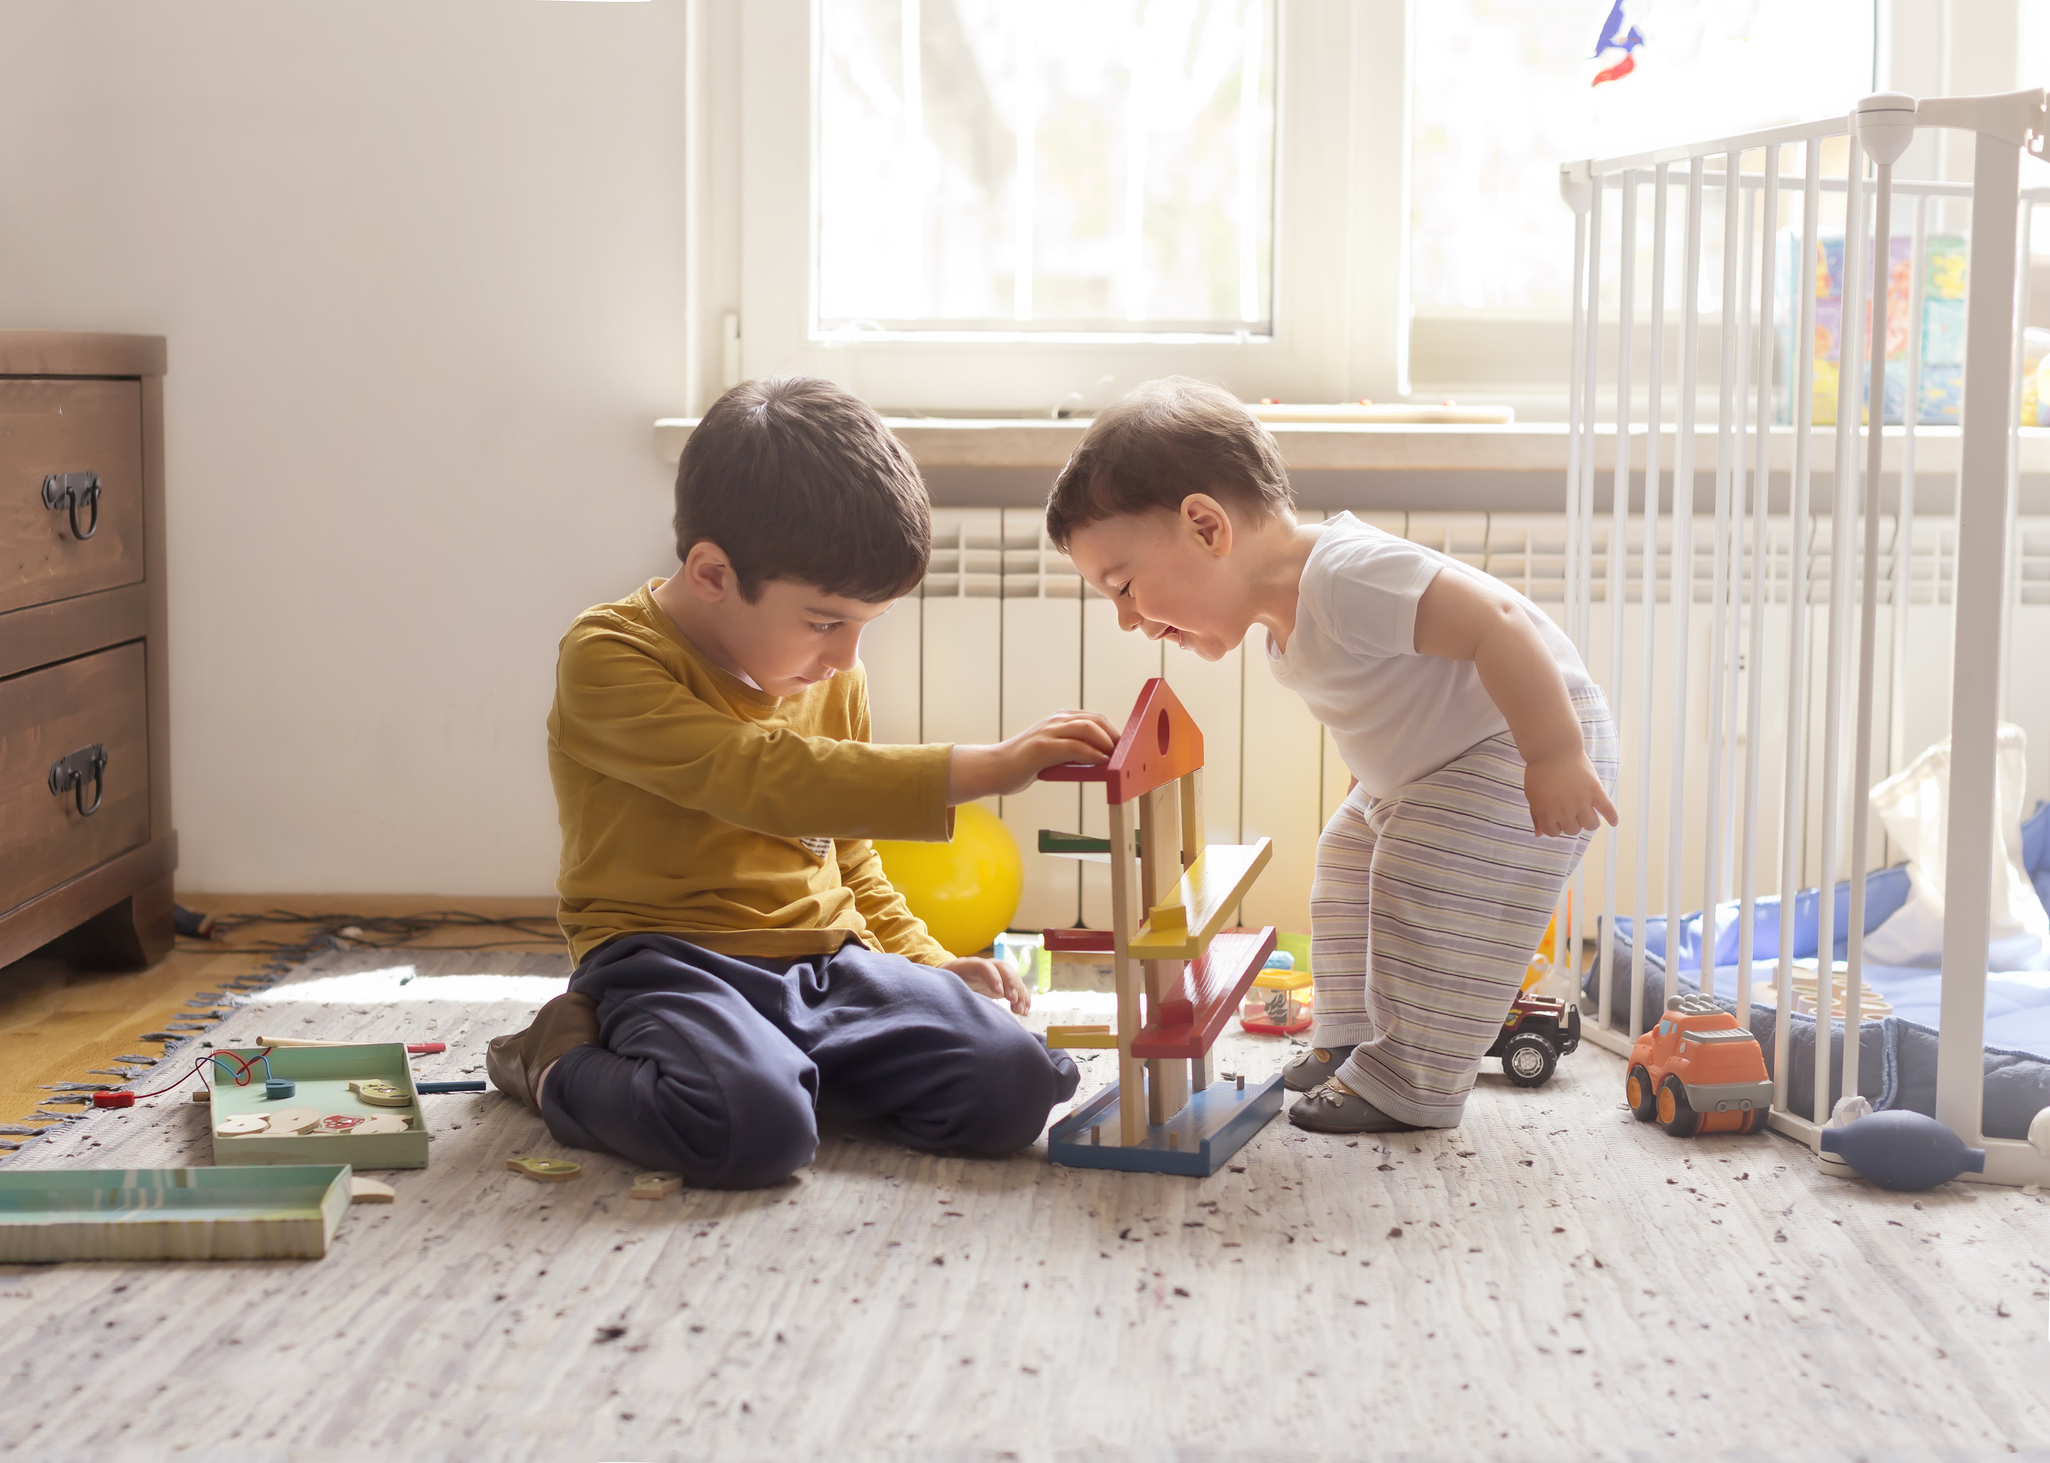 Two children playing with toys on a sunny room floor